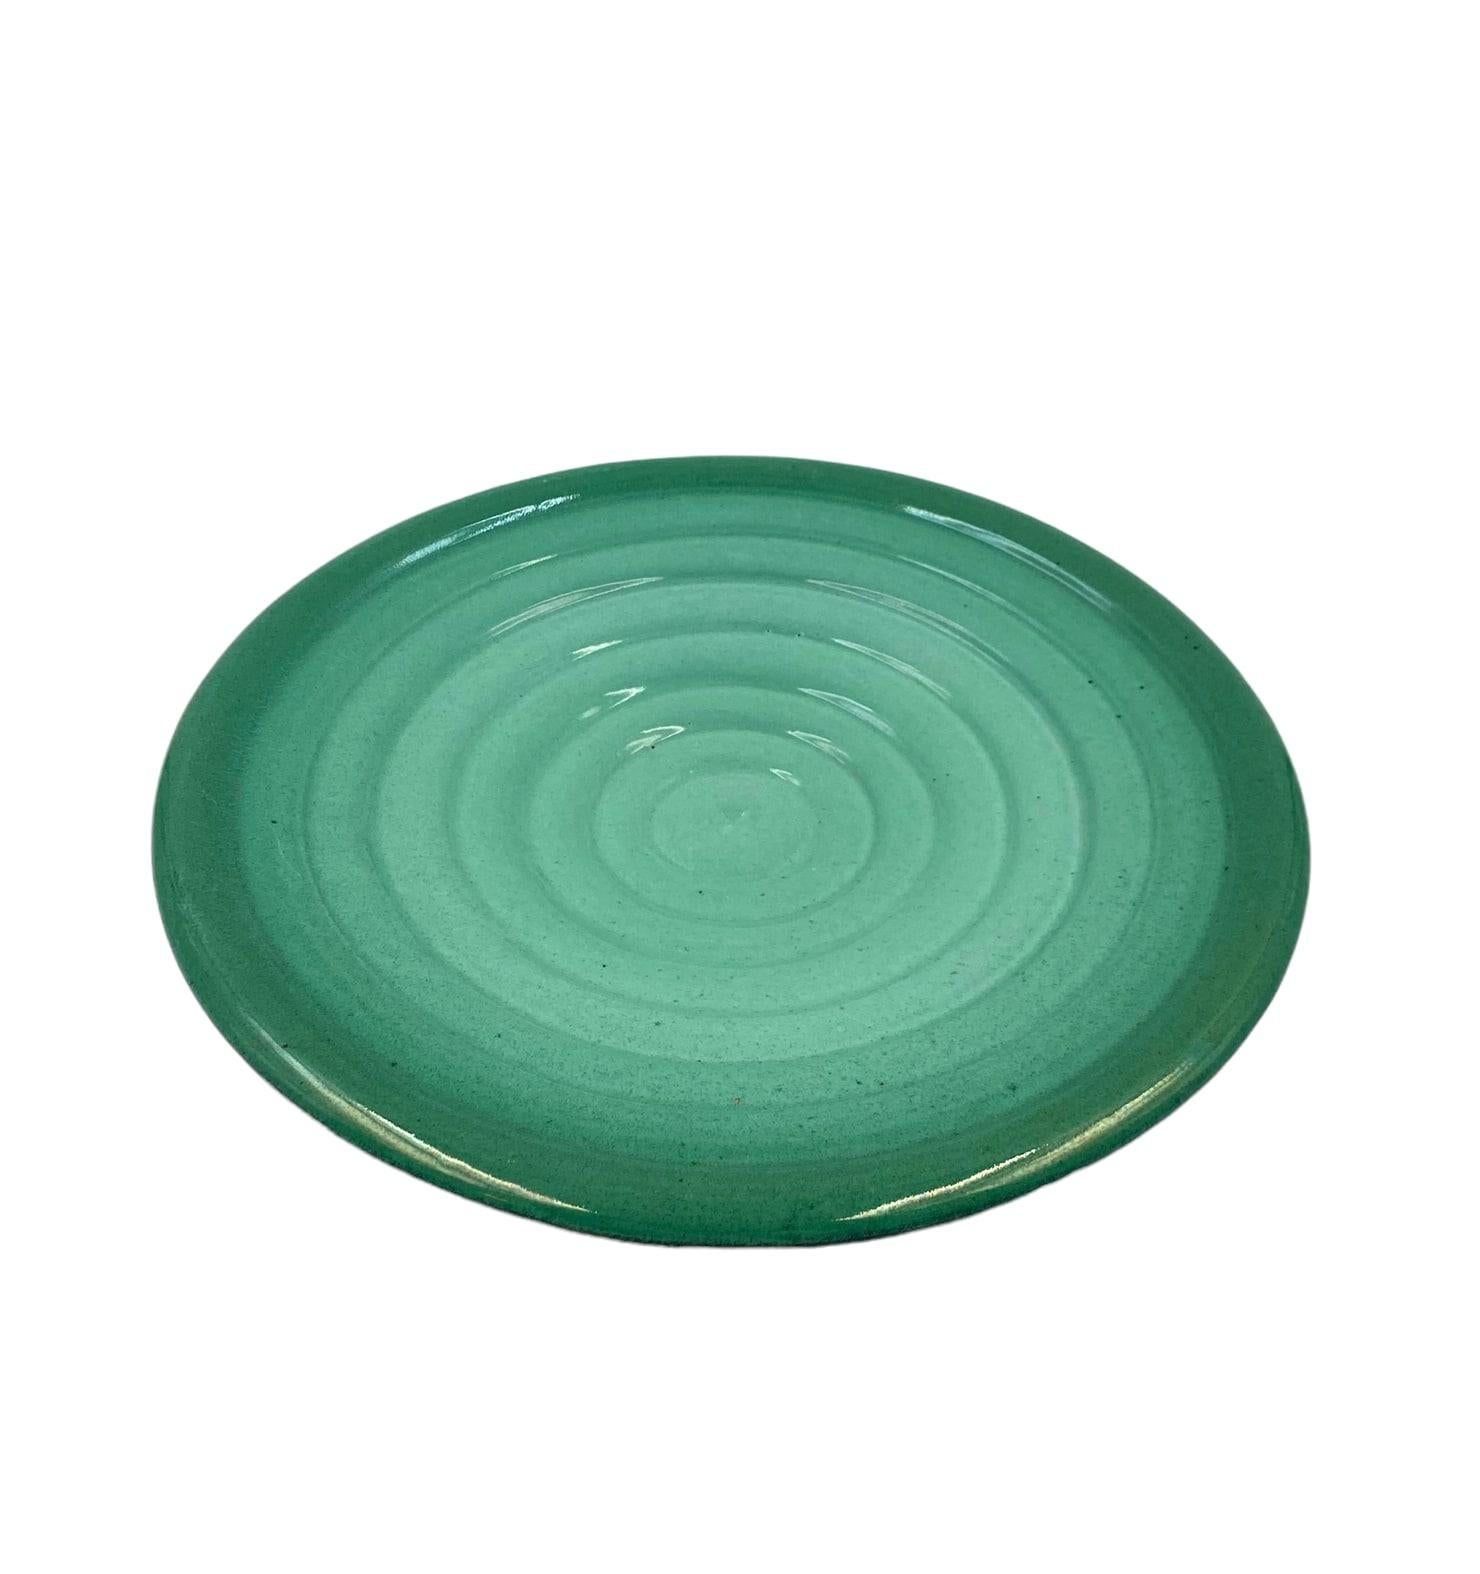 Midcentury Green Plate / Vide Poche, Giuseppe Mazzotti, Albisola, Italy, 1950 In Excellent Condition For Sale In Firenze, IT